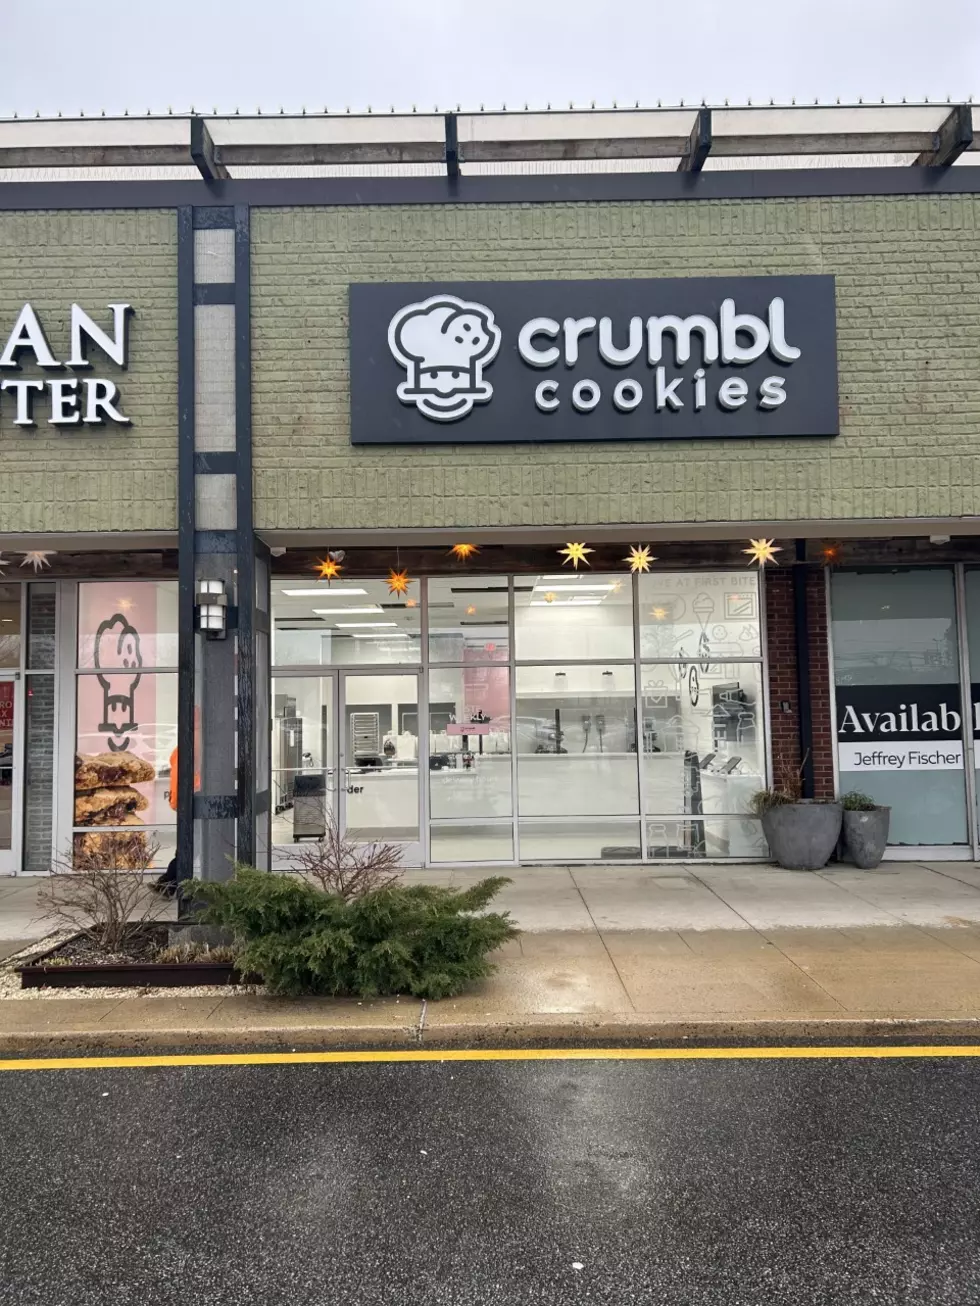 UPDATE: The New Crumbl Cookies Will Not Open Friday in Brick Township, NJ